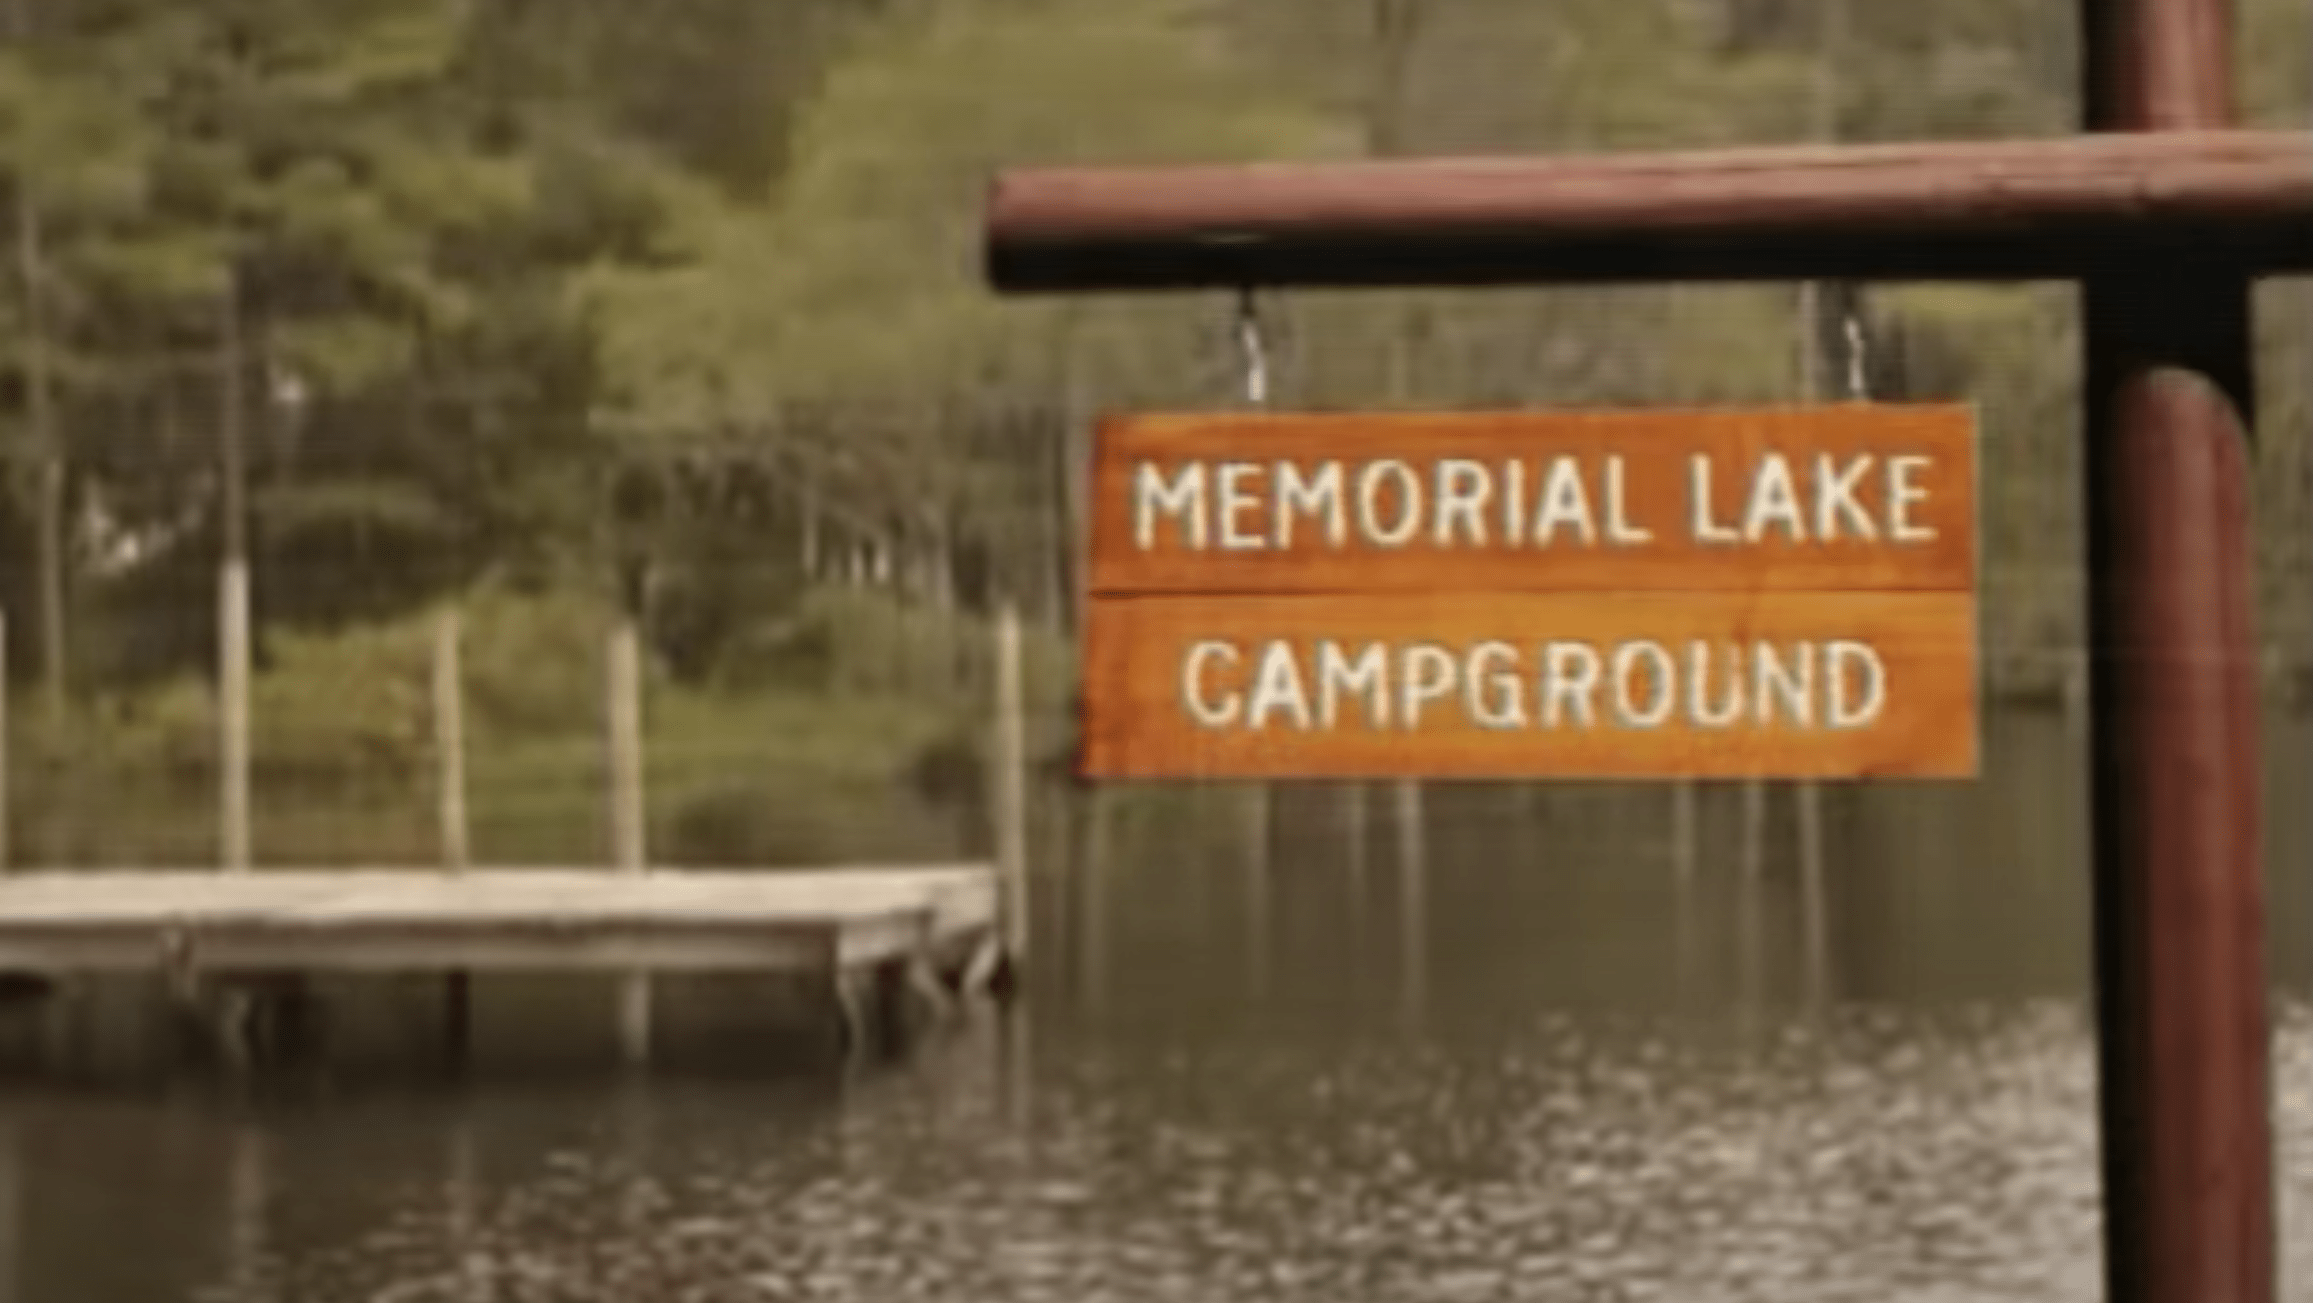 Ah yes, the famous Memorial Lake Campground. (Image: Maverick Movies)